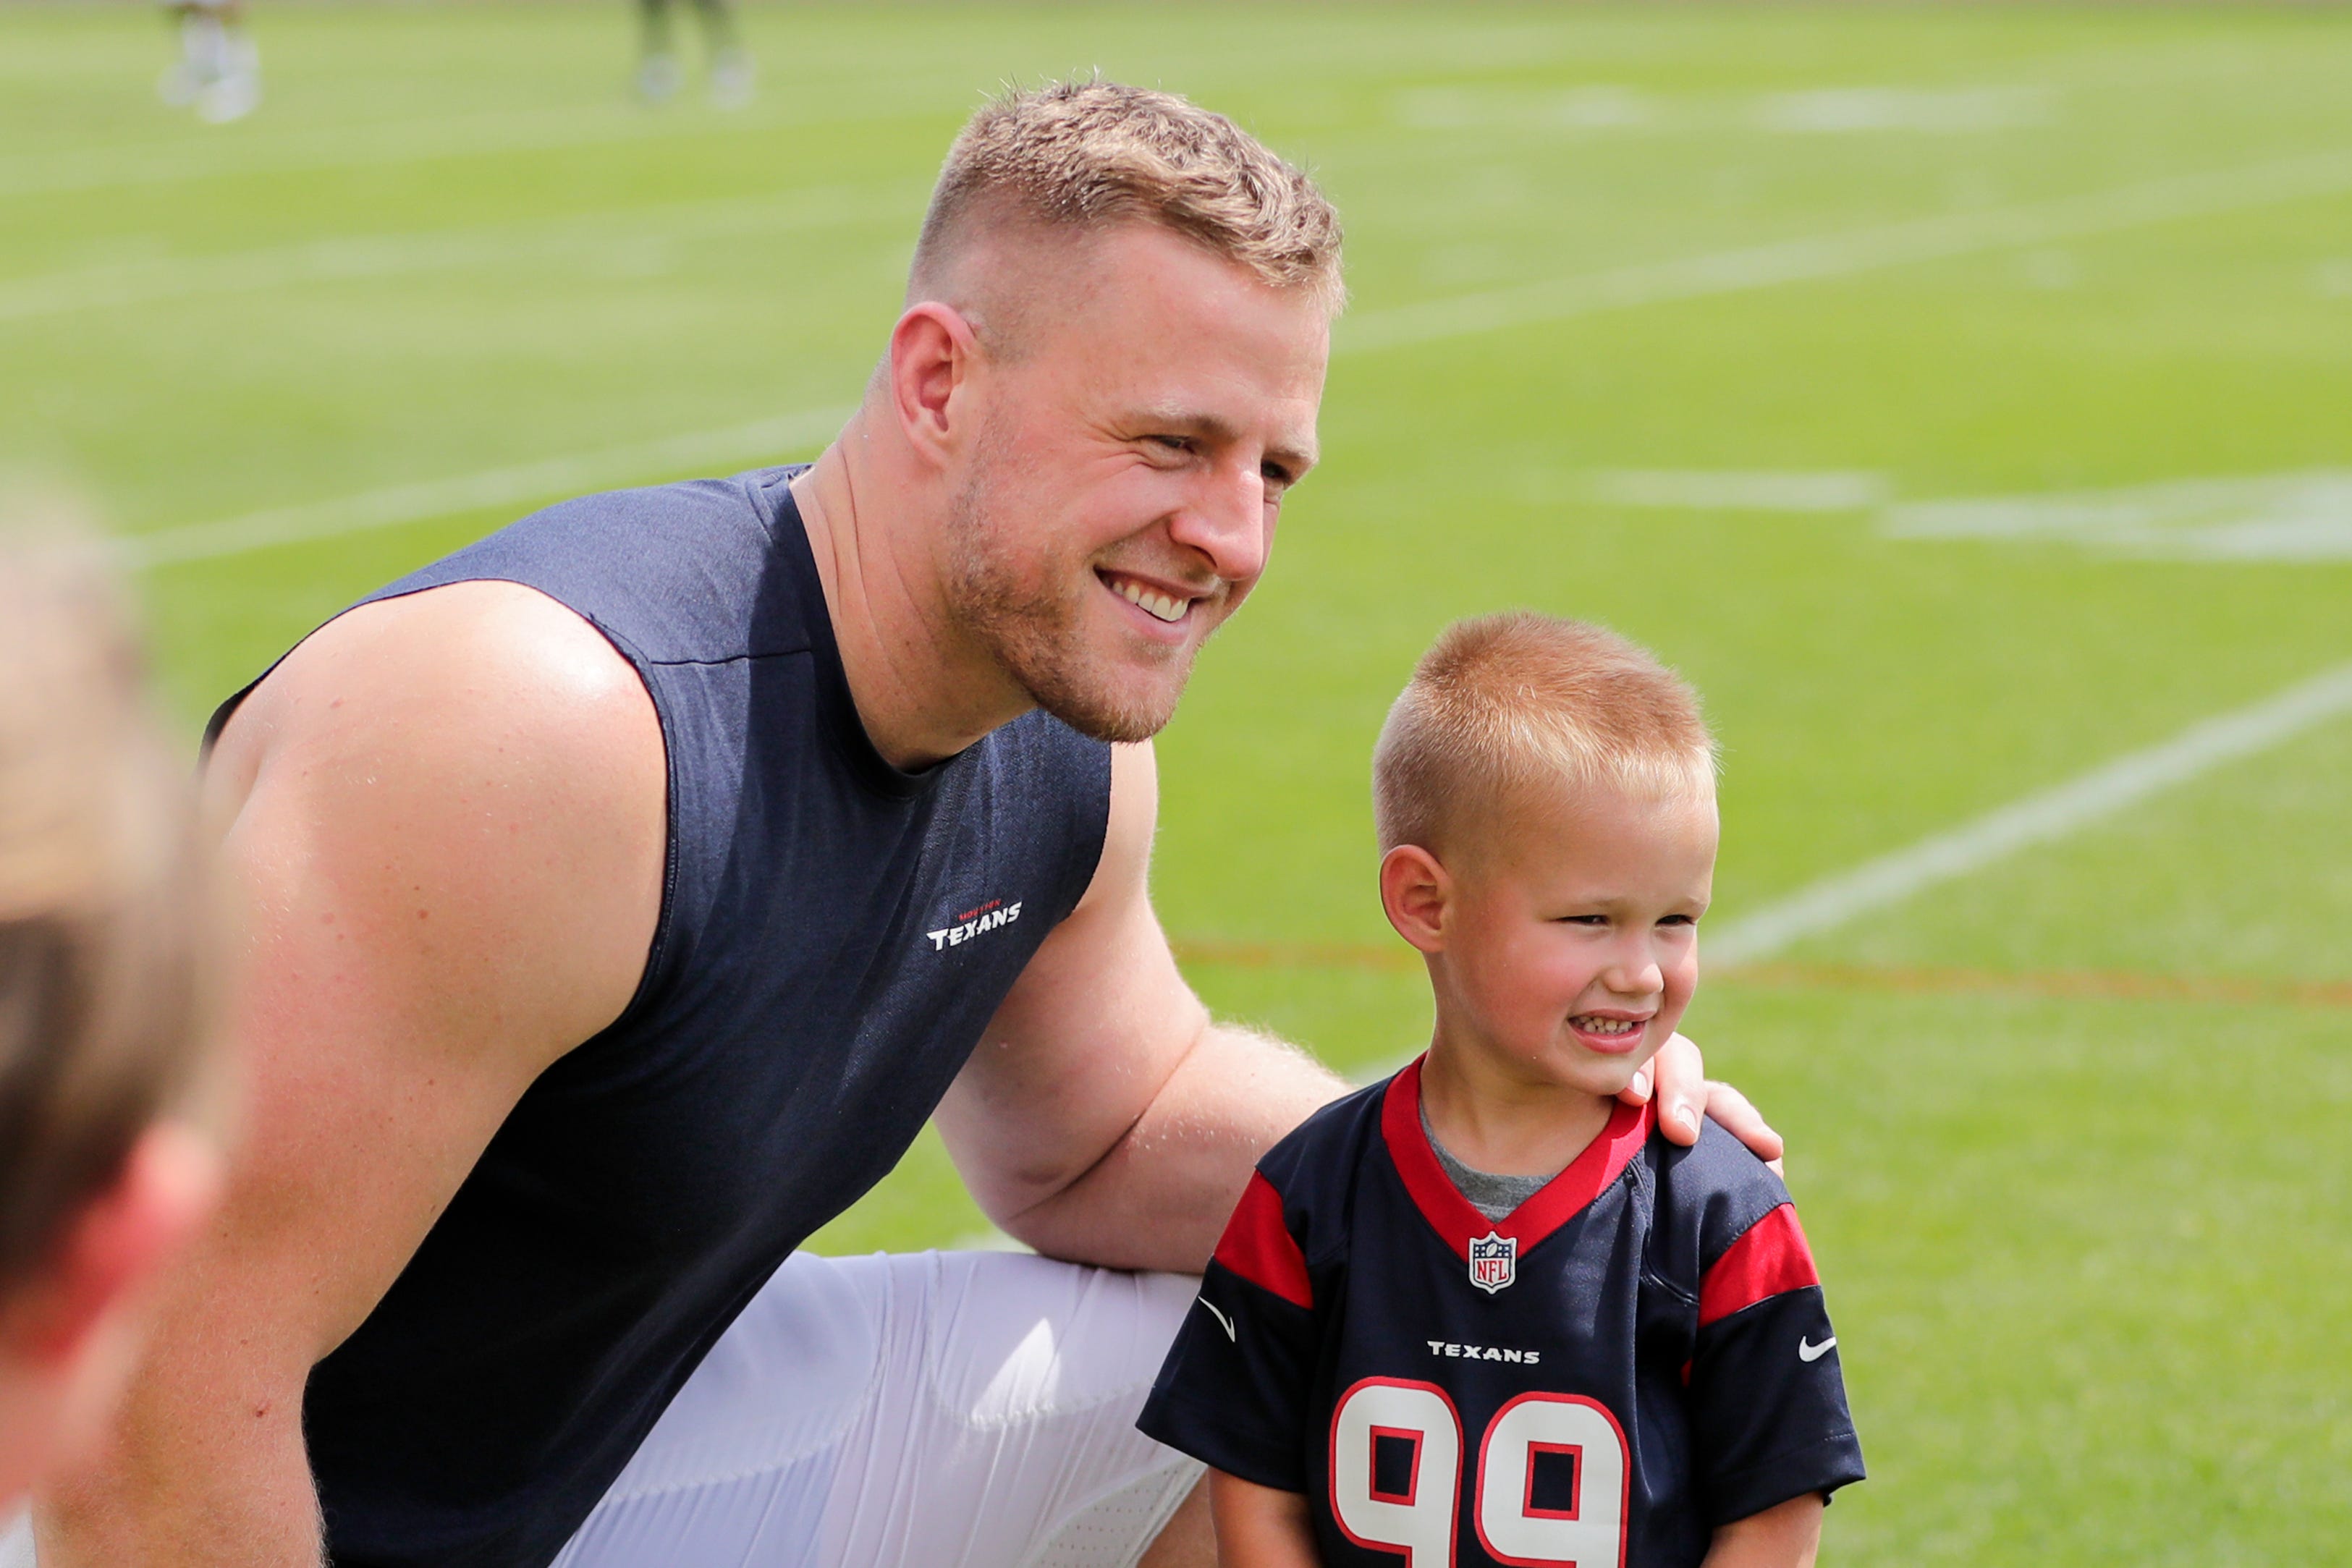 Texans defensive end J. J. Watt (99) greets fans after a joint training camp practice with the Green Bay Packers at Ray Nitchske Field Monday, August 5, 2019, in Ashwaubenon, Wis.